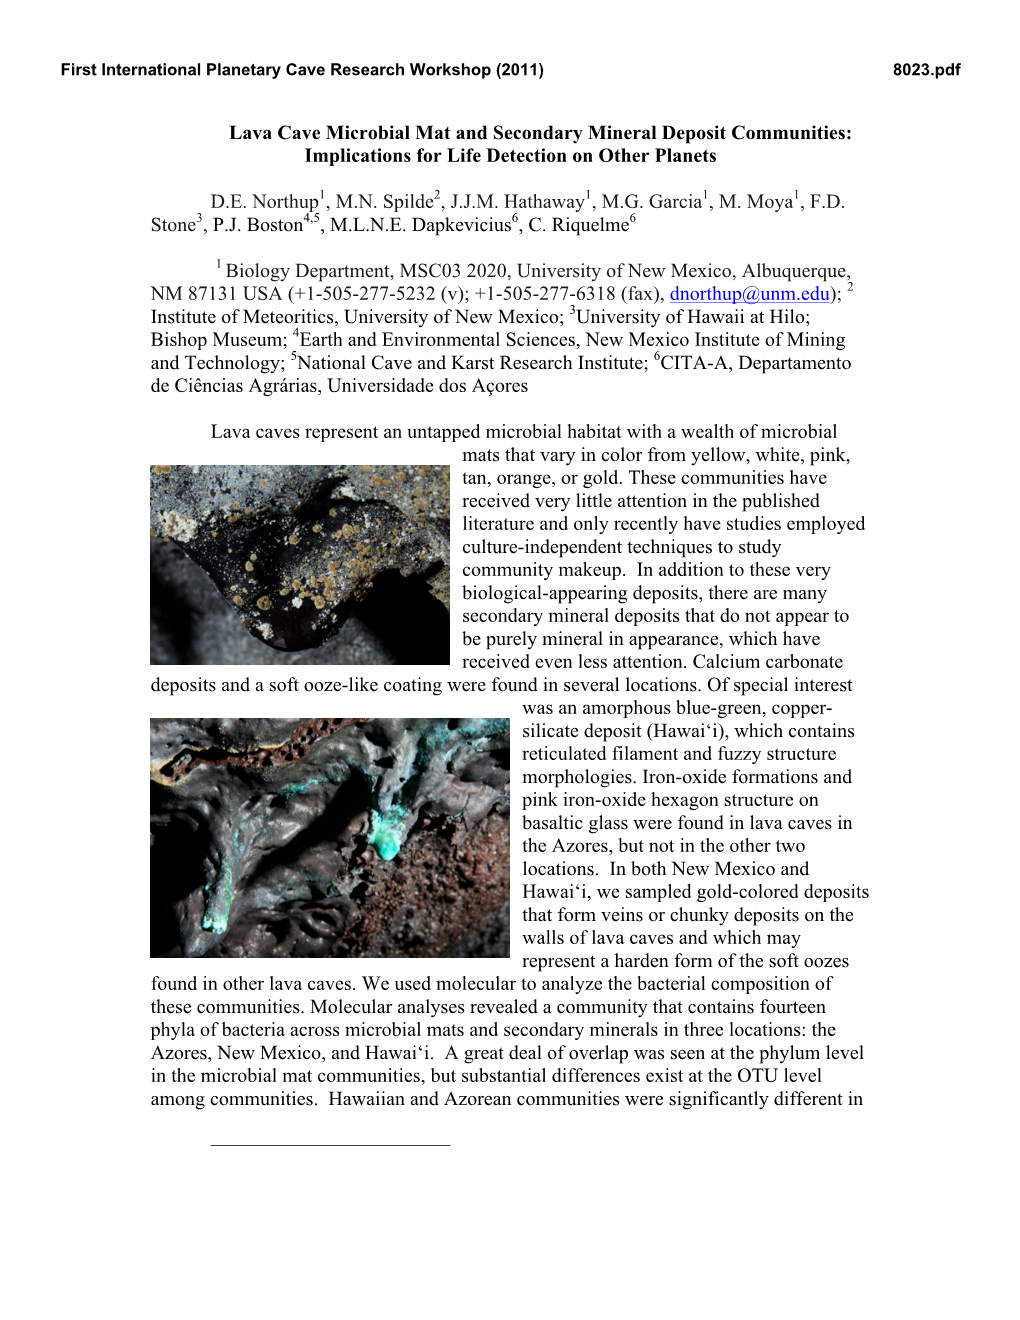 Lava Cave Microbial Mat and Secondary Mineral Deposit Communities: Implications for Life Detection on Other Planets